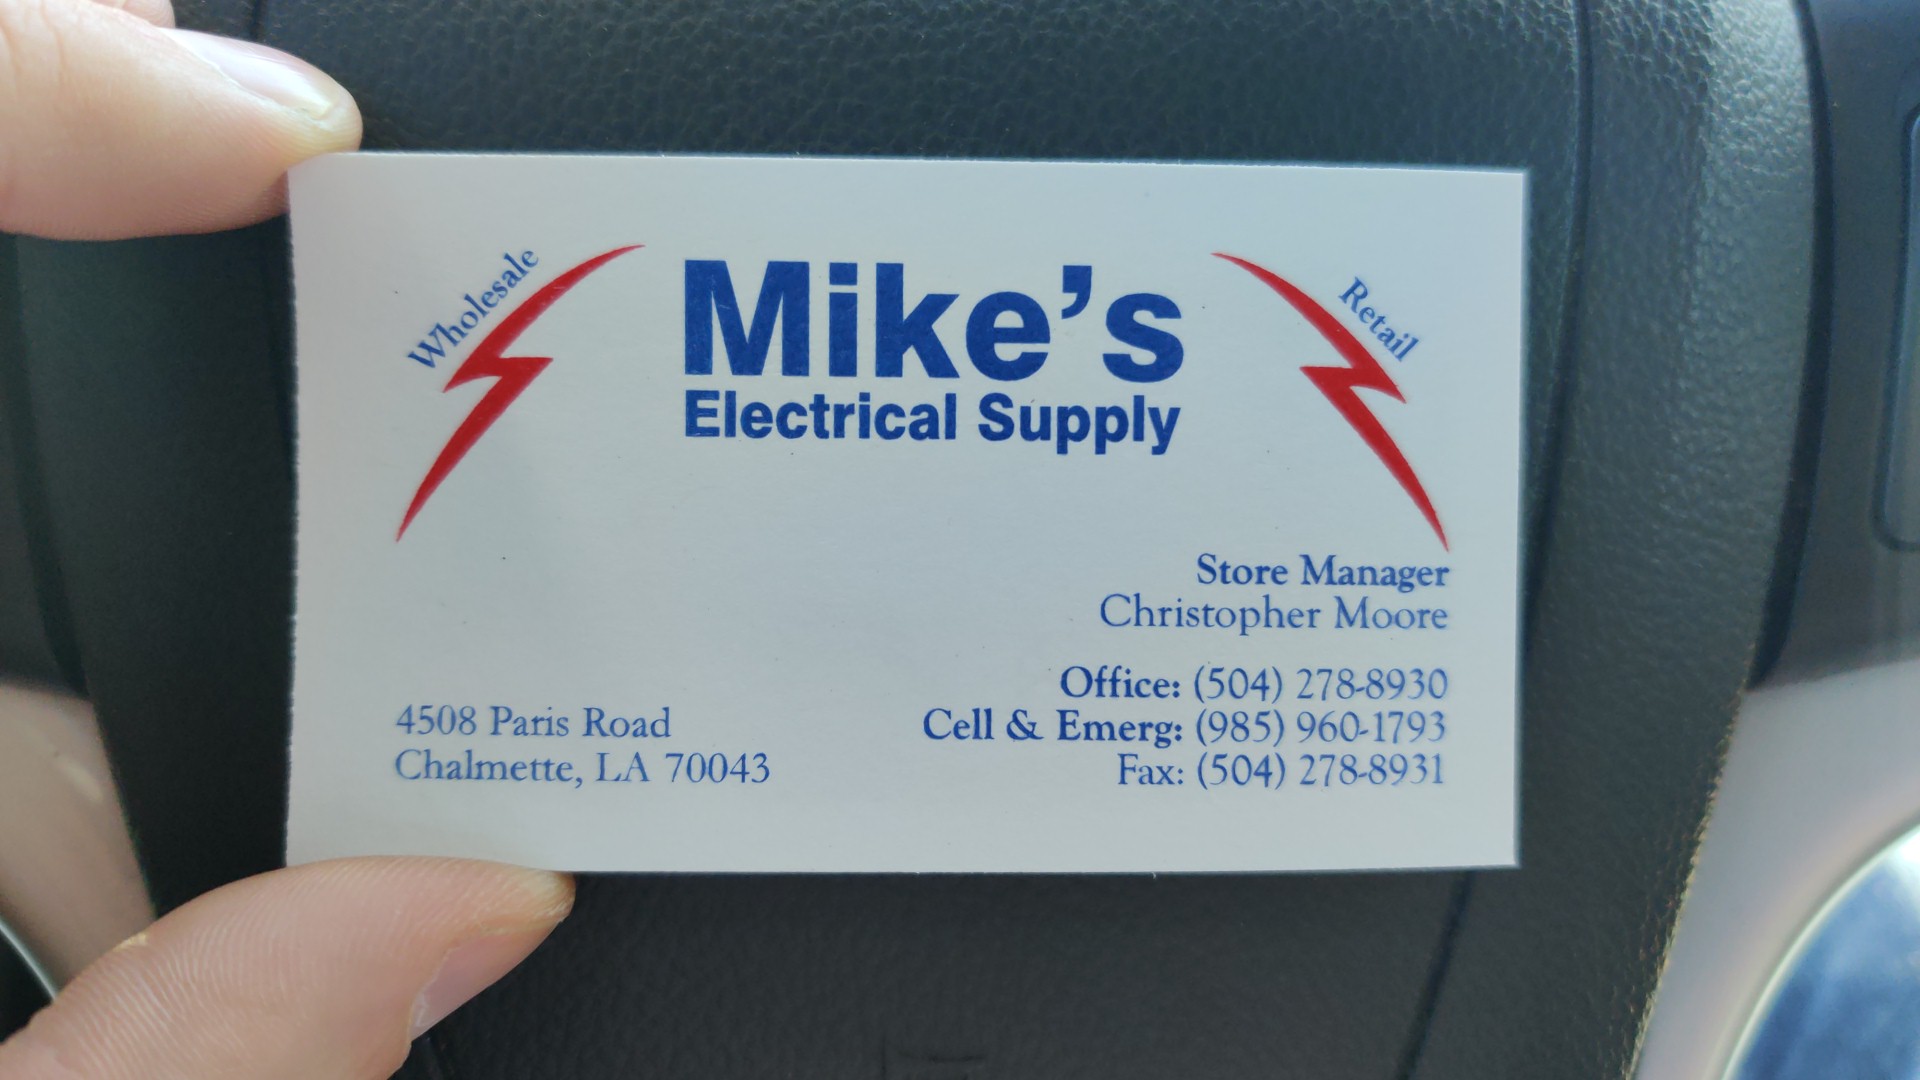 Mike's Electrical Supply 4508 Paris Rd, Chalmette Louisiana 70043